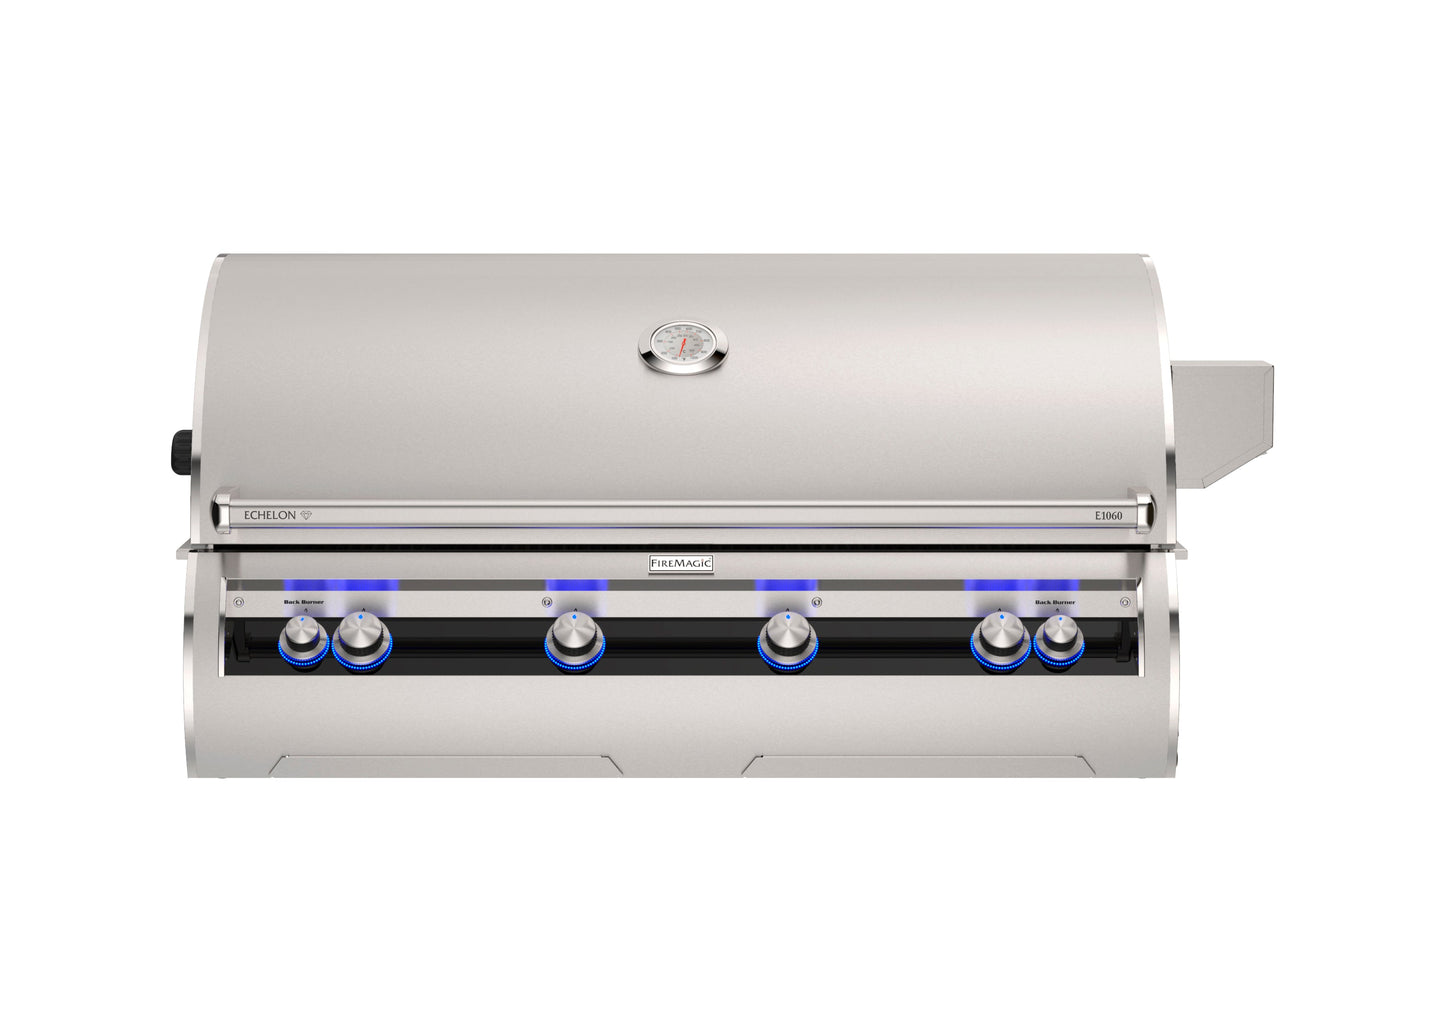 Firemagic 48 Inch Echelon Series Built-In Grill with Analog Thermometer - E1060i-9EAN